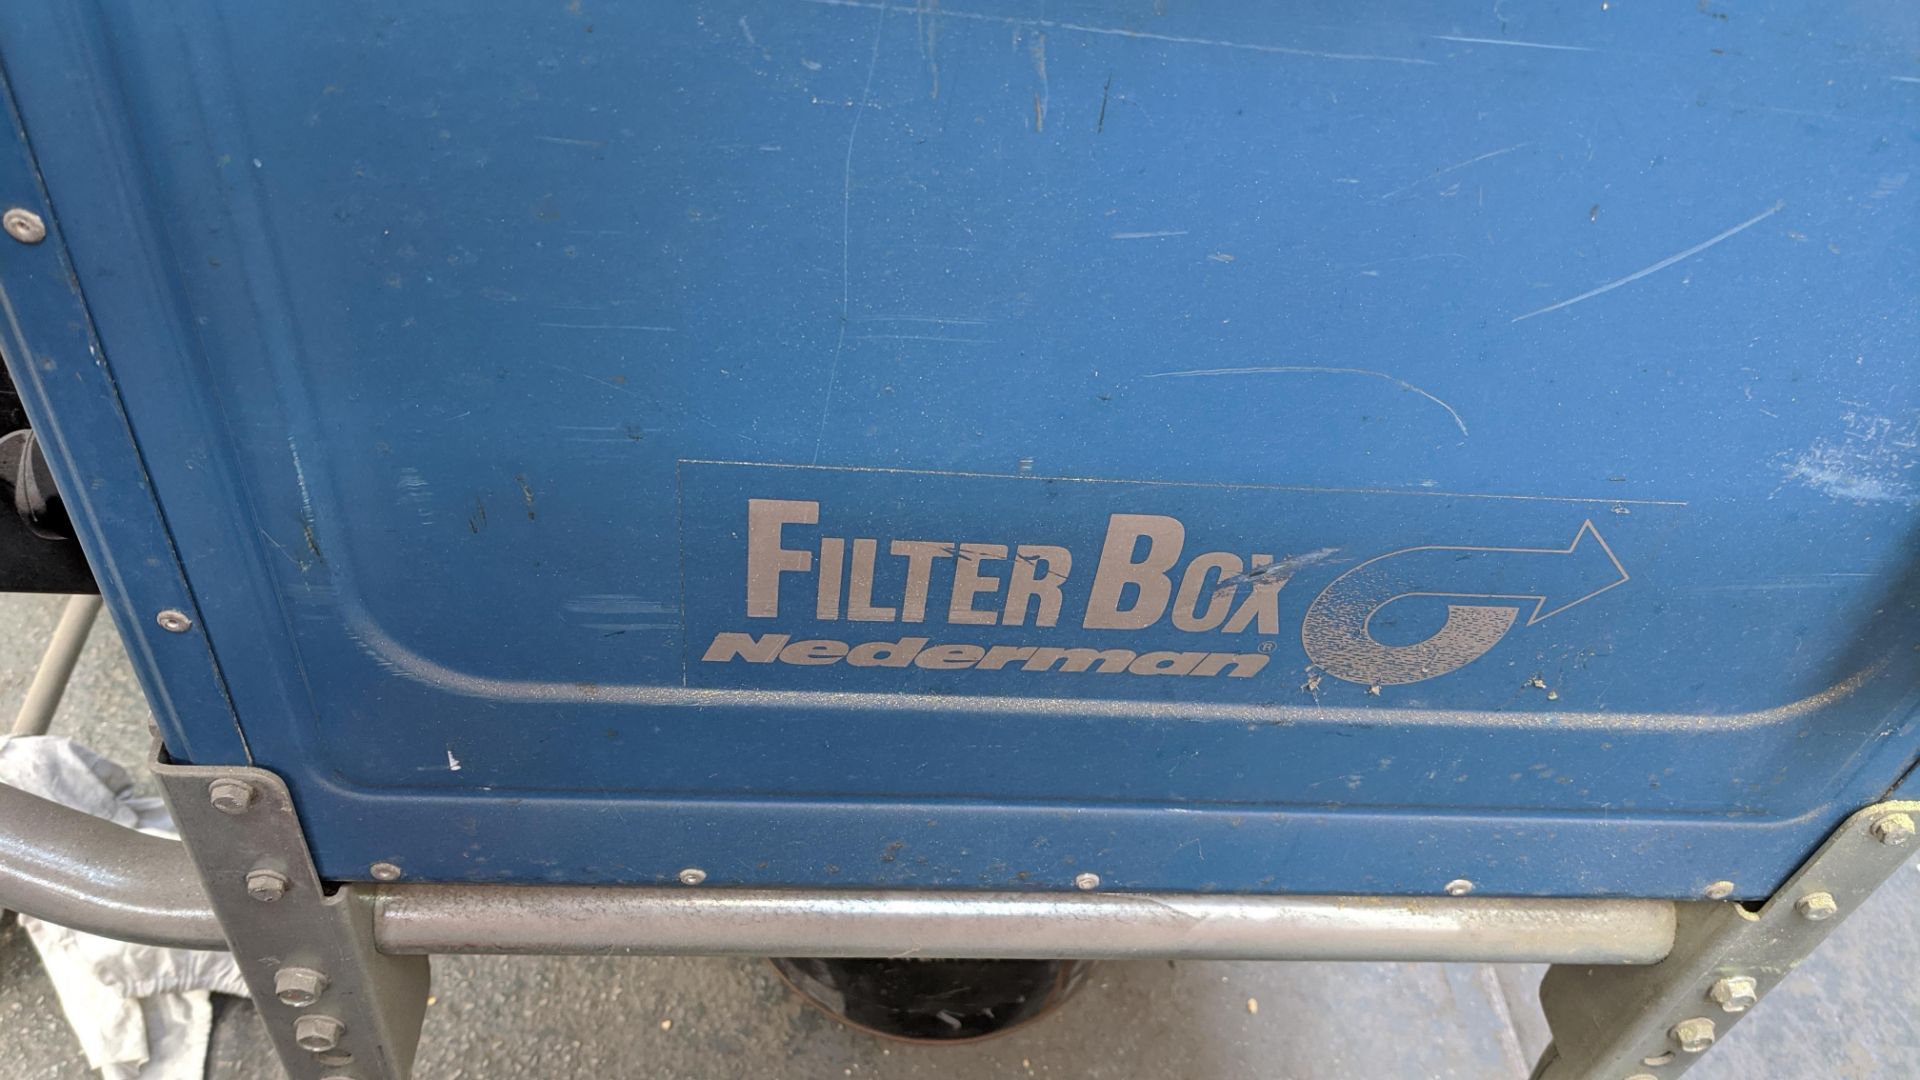 Filterbox by Nederman mobile extraction system - Image 8 of 8